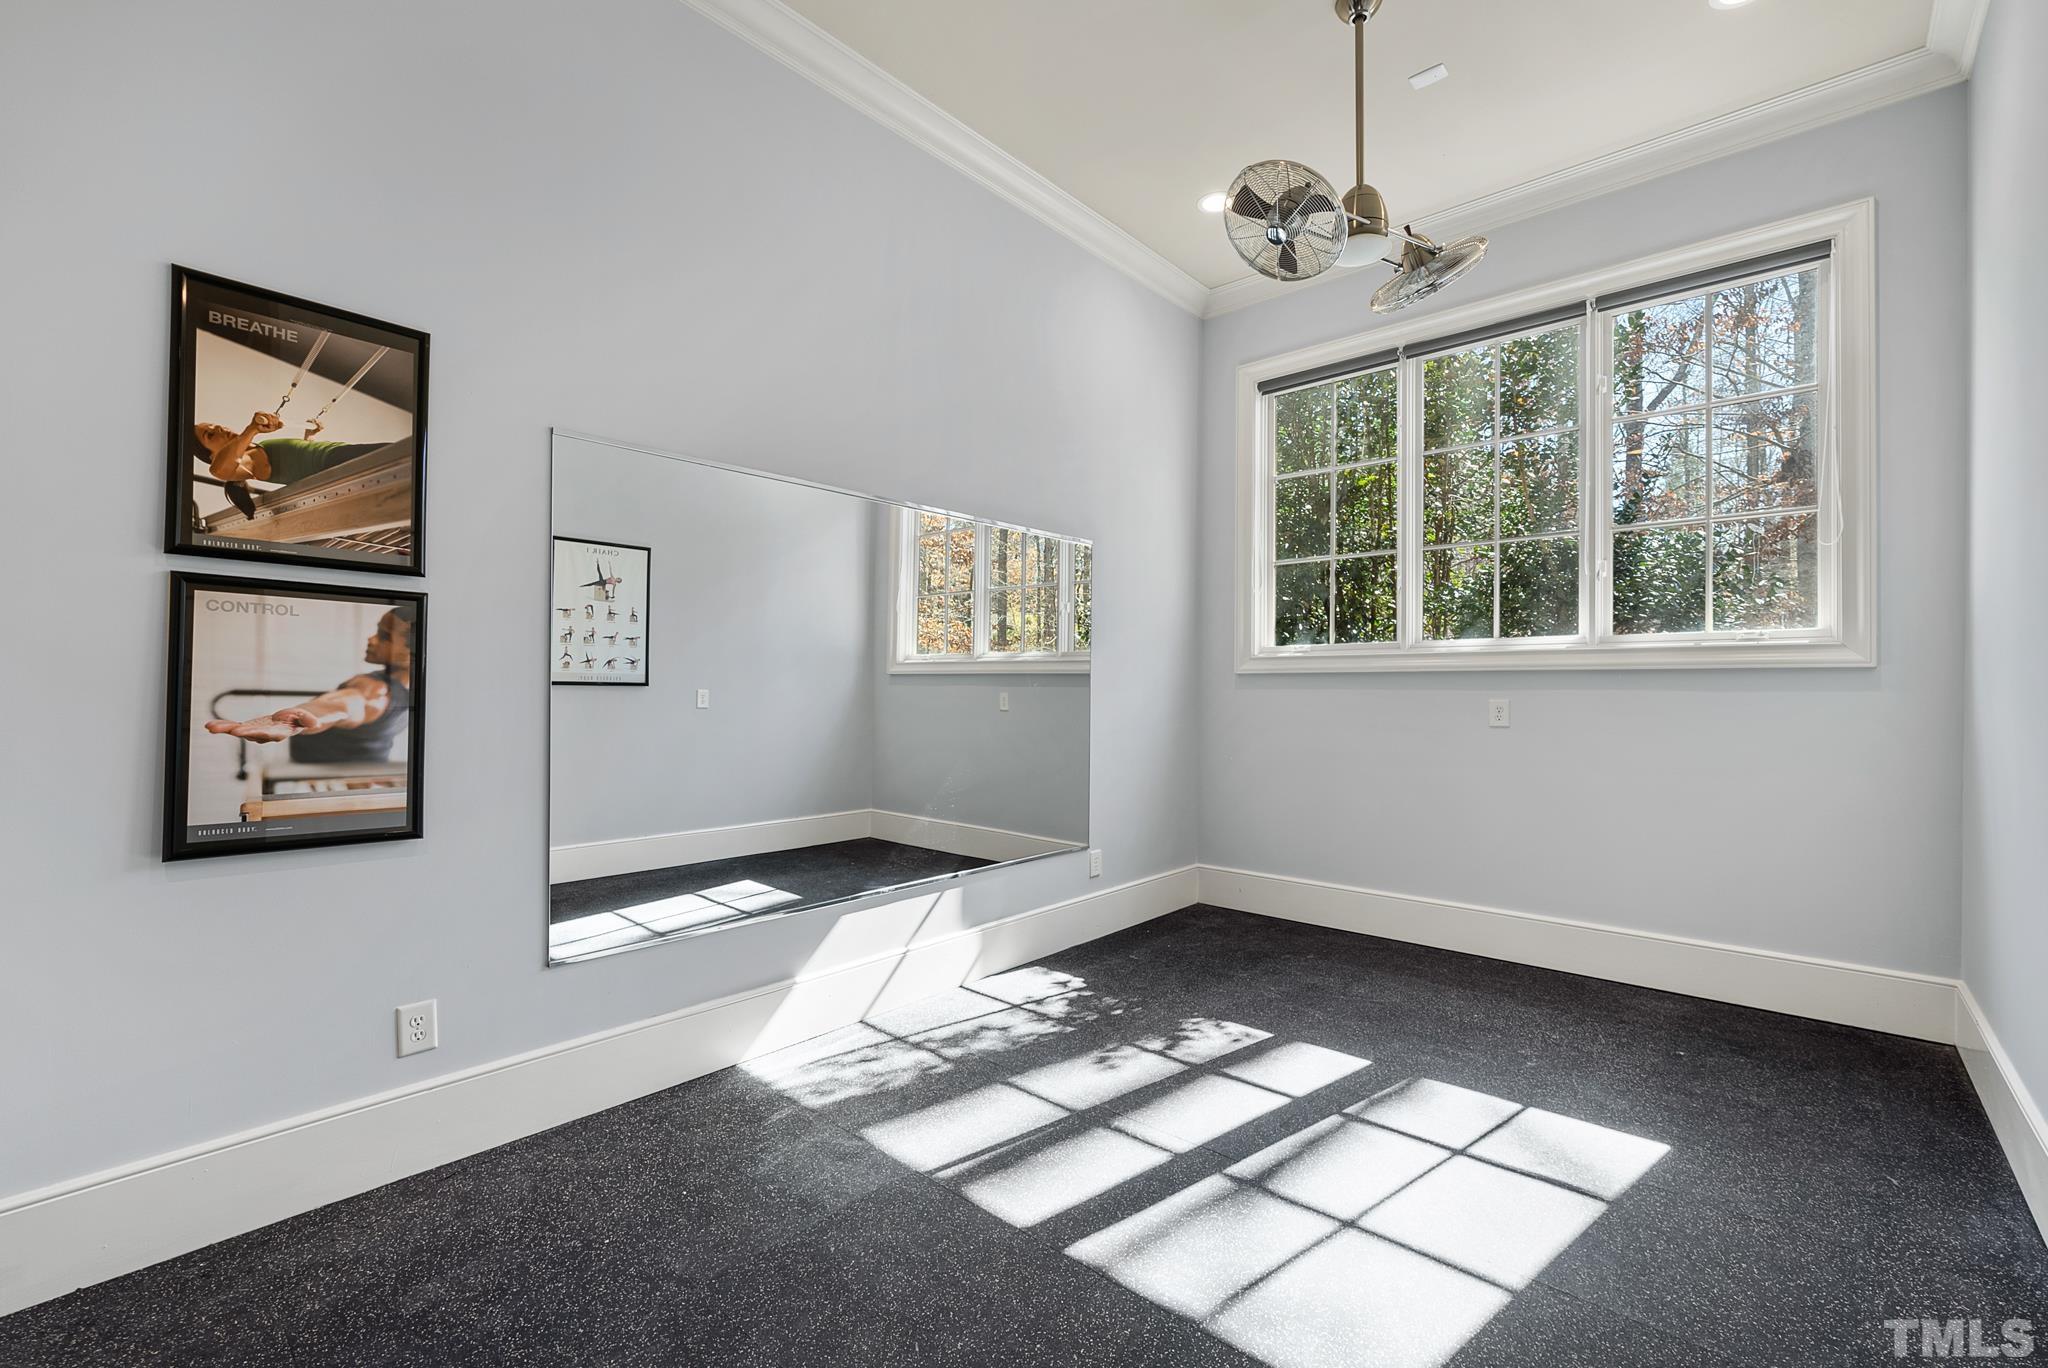 Rubber tile flooring, Mirrored walls, Private location connecting to lower garage & easy outdoor access.